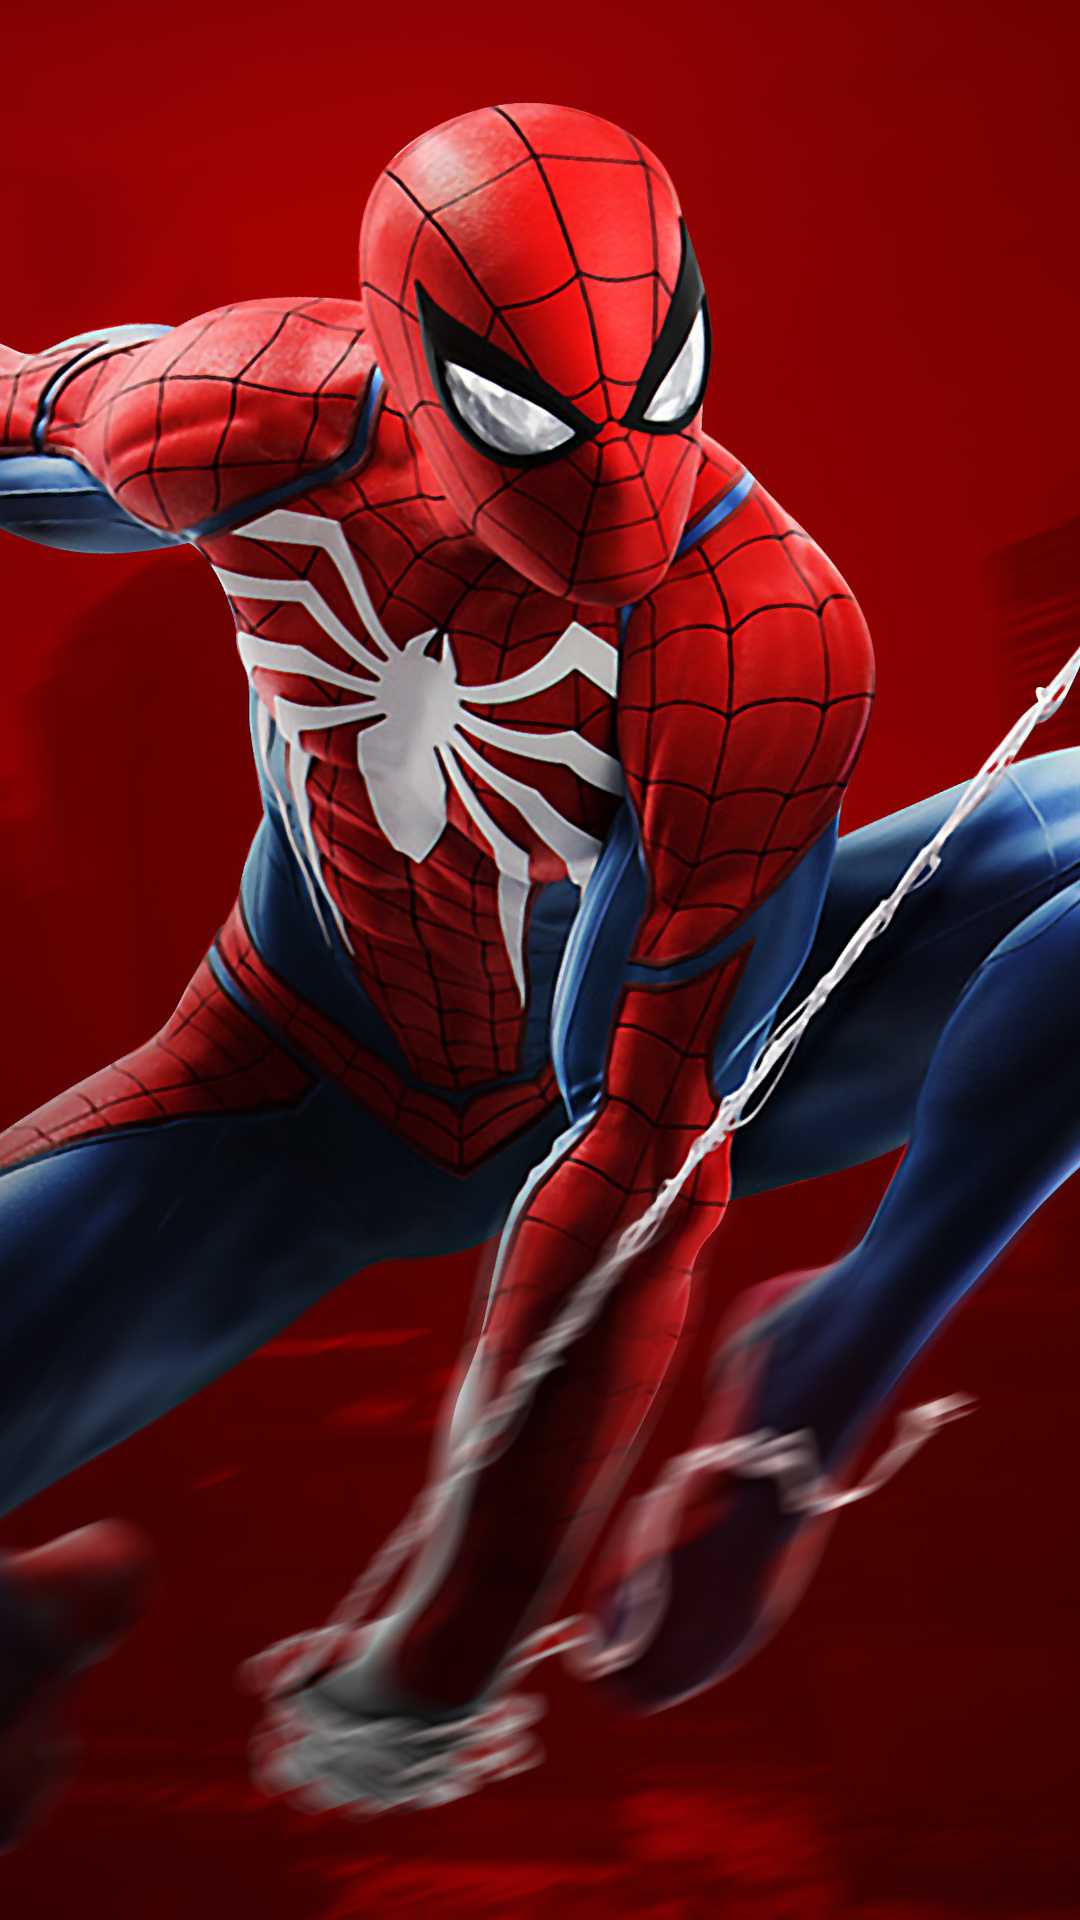 Spider-Man PS4, 4K iPhone 7, Pixel XL One Plus, HD wallpapers images, 1080x1920 Full HD Phone